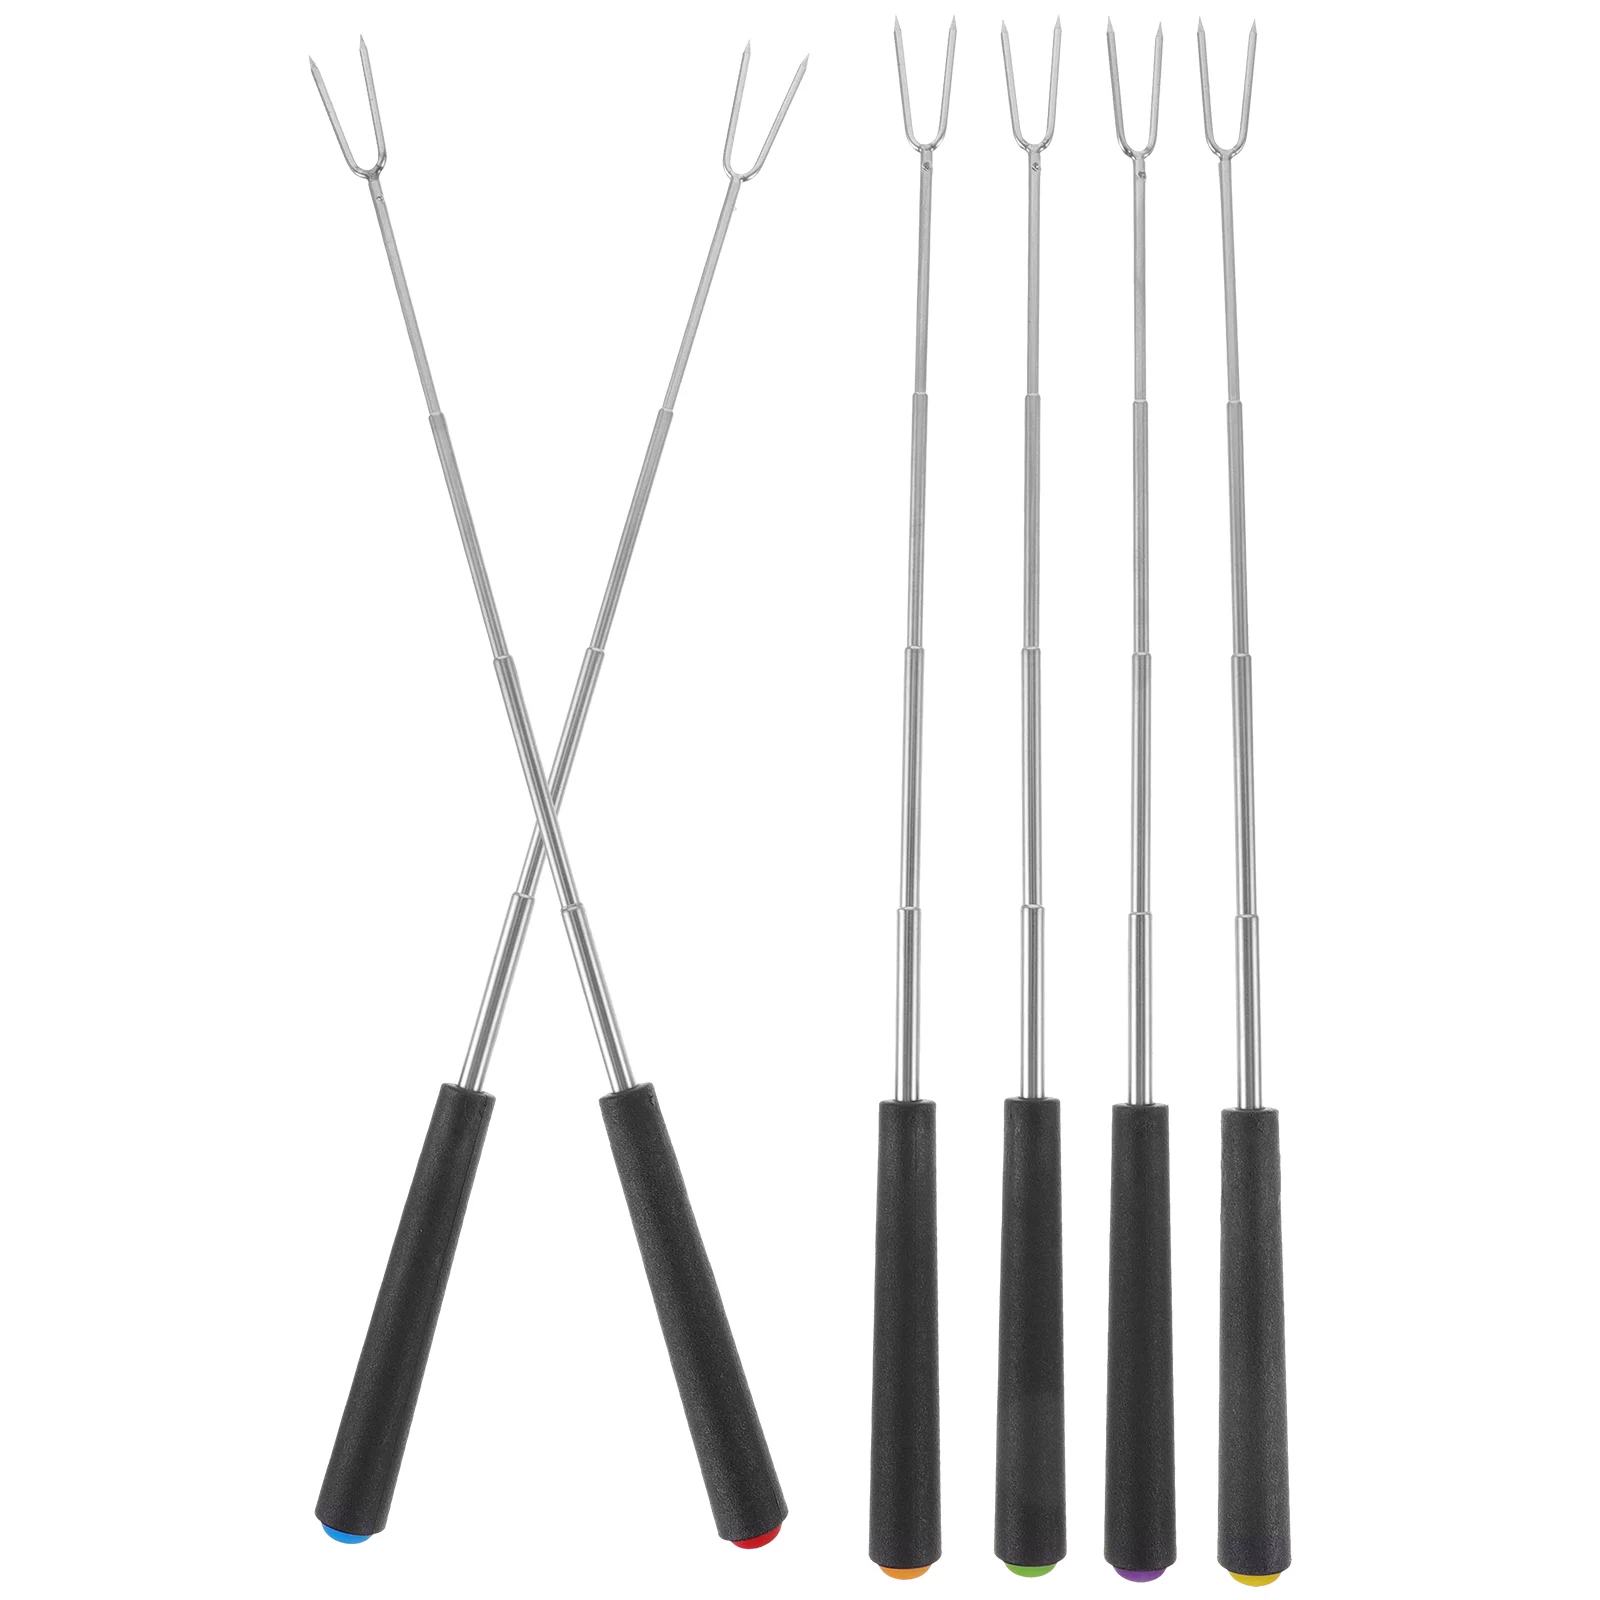 

6 Pcs Telescopic Barbecue Fork Metal Roasting Supplies Sticks Outdoor Bbq Skewers Grilling Meat Set Abs